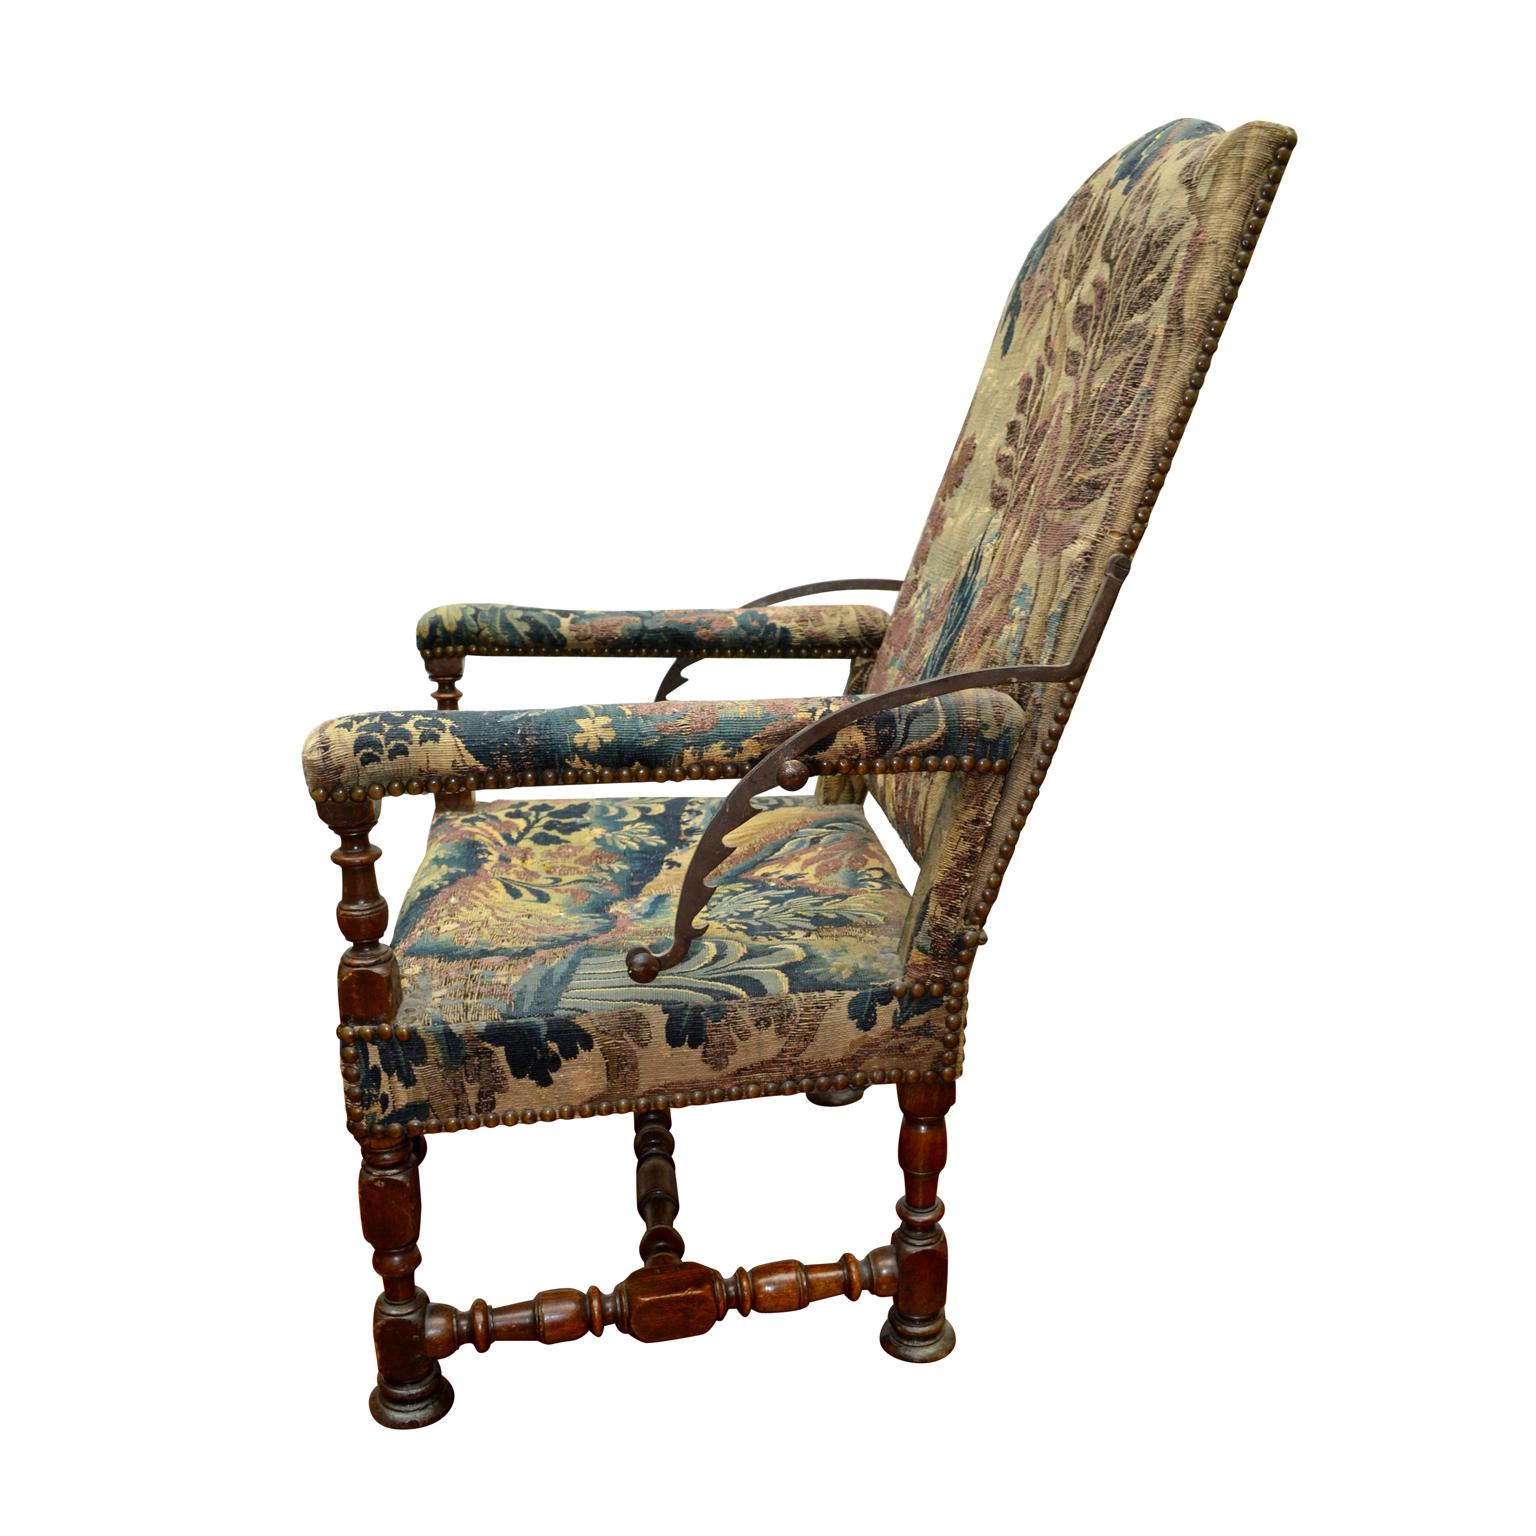 A rare late 17th century French reclining armchair with a carved walnut stretcher, upholstered in its original verdure tapestry of the period. This is a 400 year old precursor to the La-Z-Boy brand and belongs in a Furniture Museum. As can be seen